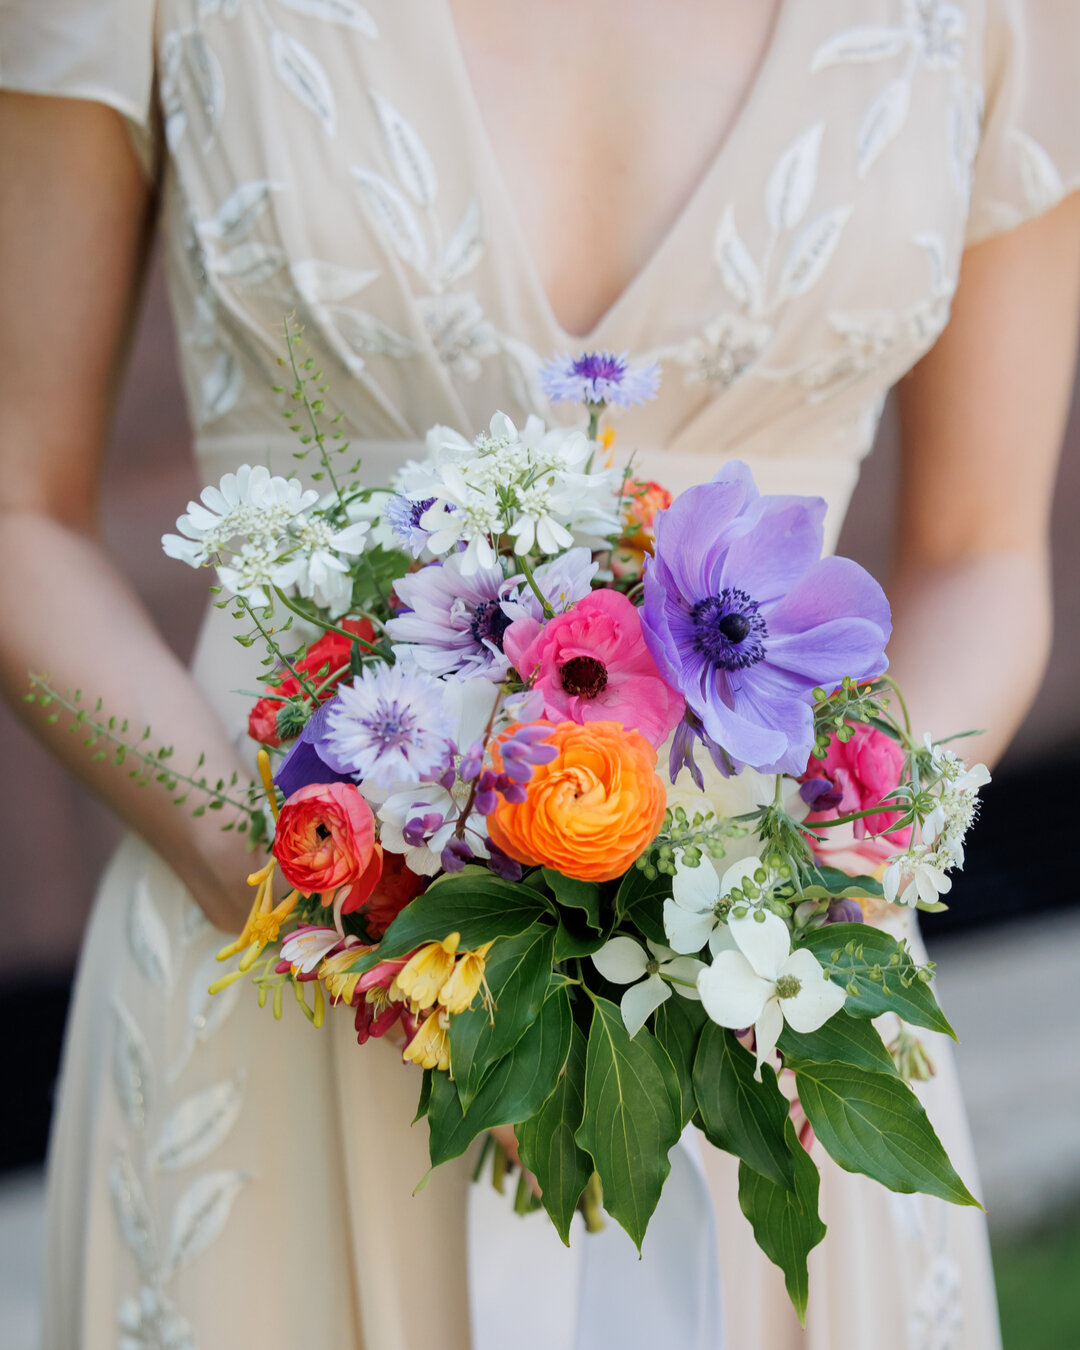 We love color loving brides &amp; grooms! If you are into local, sustainable florals, and want something colorful, unique and natural for your celebration, send us a message! ​​​​​​​​​
We have loads of great information on the weddings &amp; events s